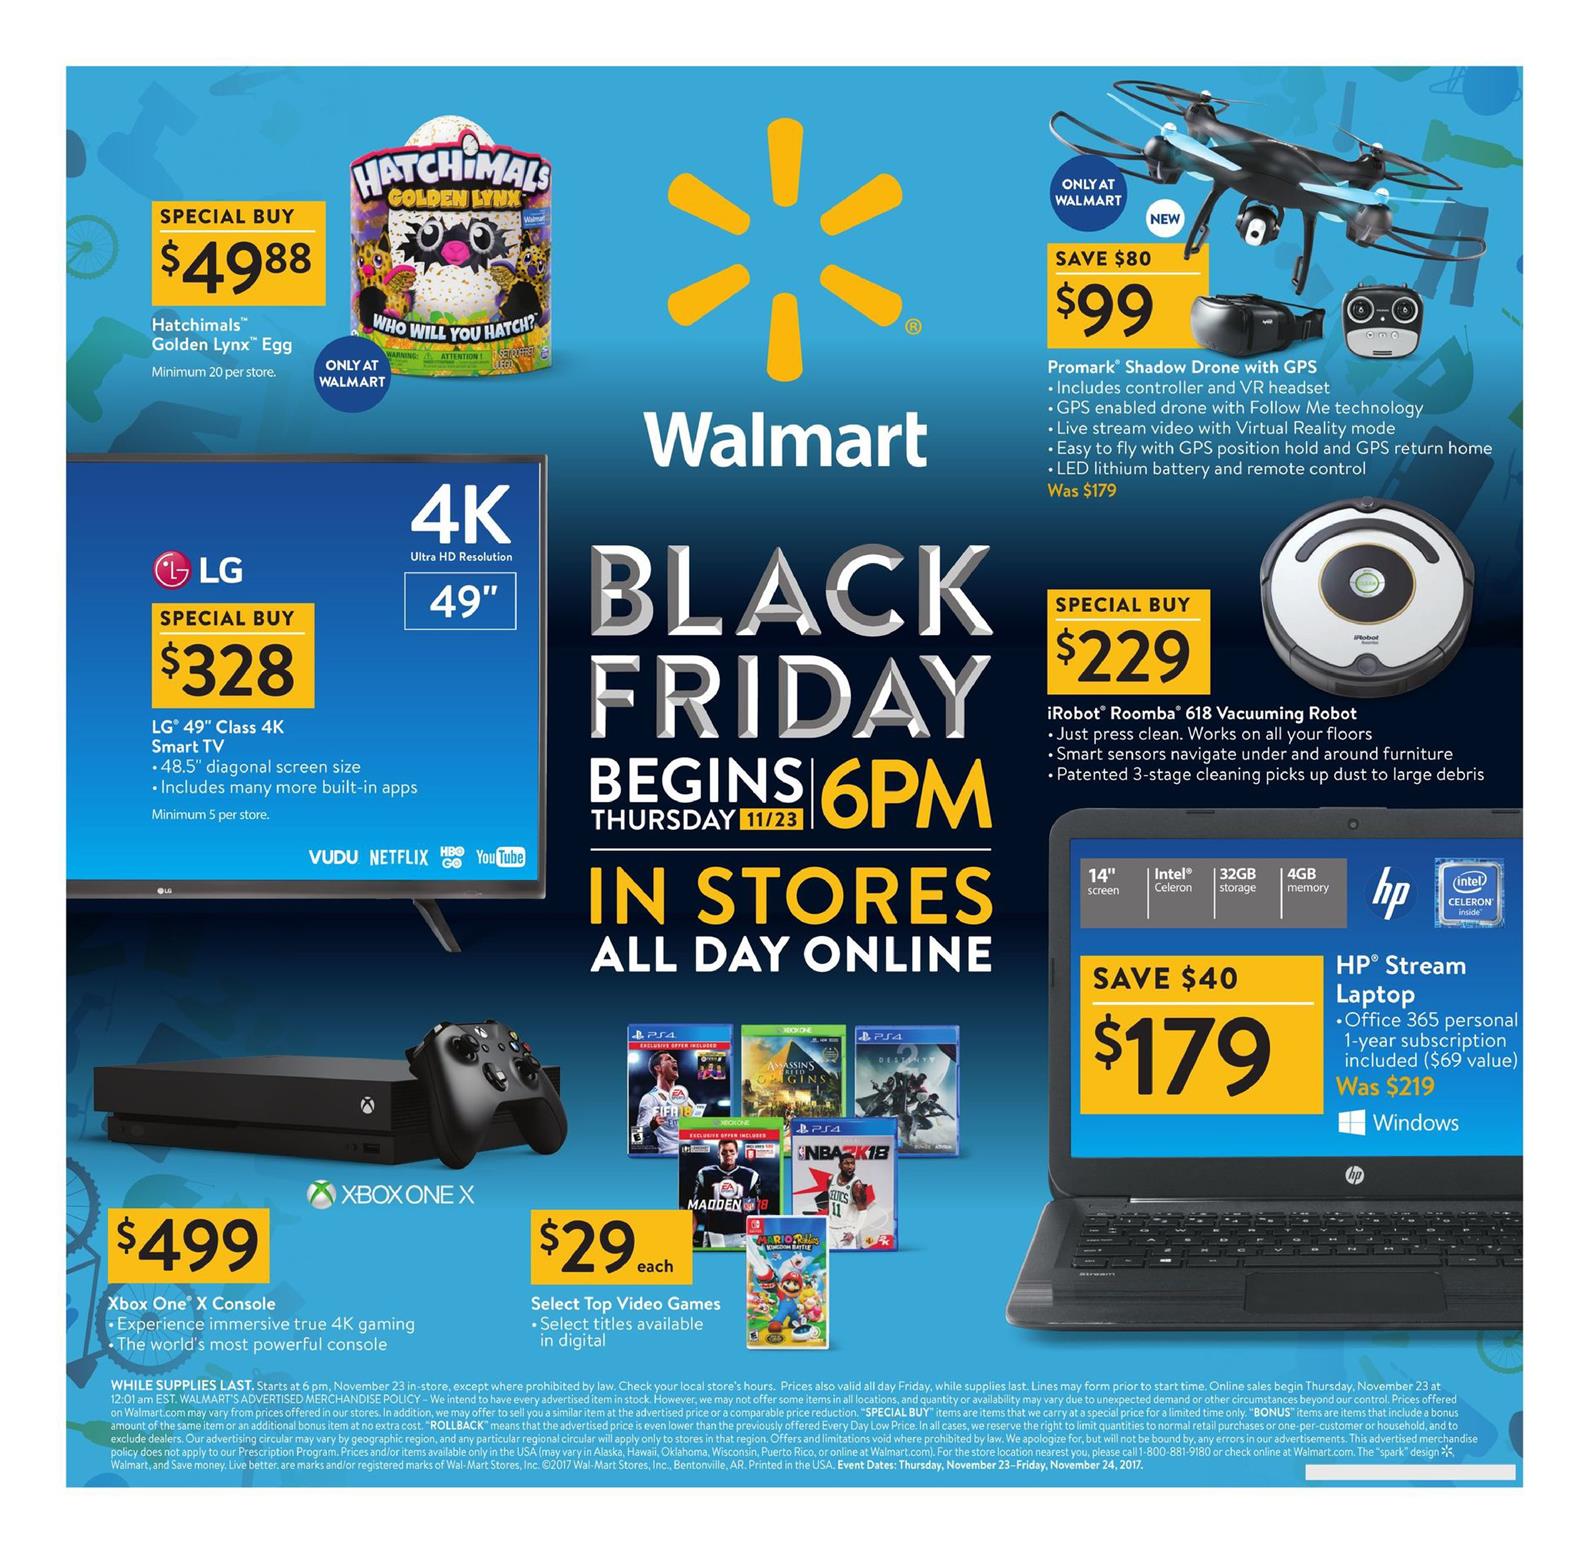 Walmart Black Friday Ad 2017 - WeeklyAds2 - What Is Blizzards Black Friday Deal